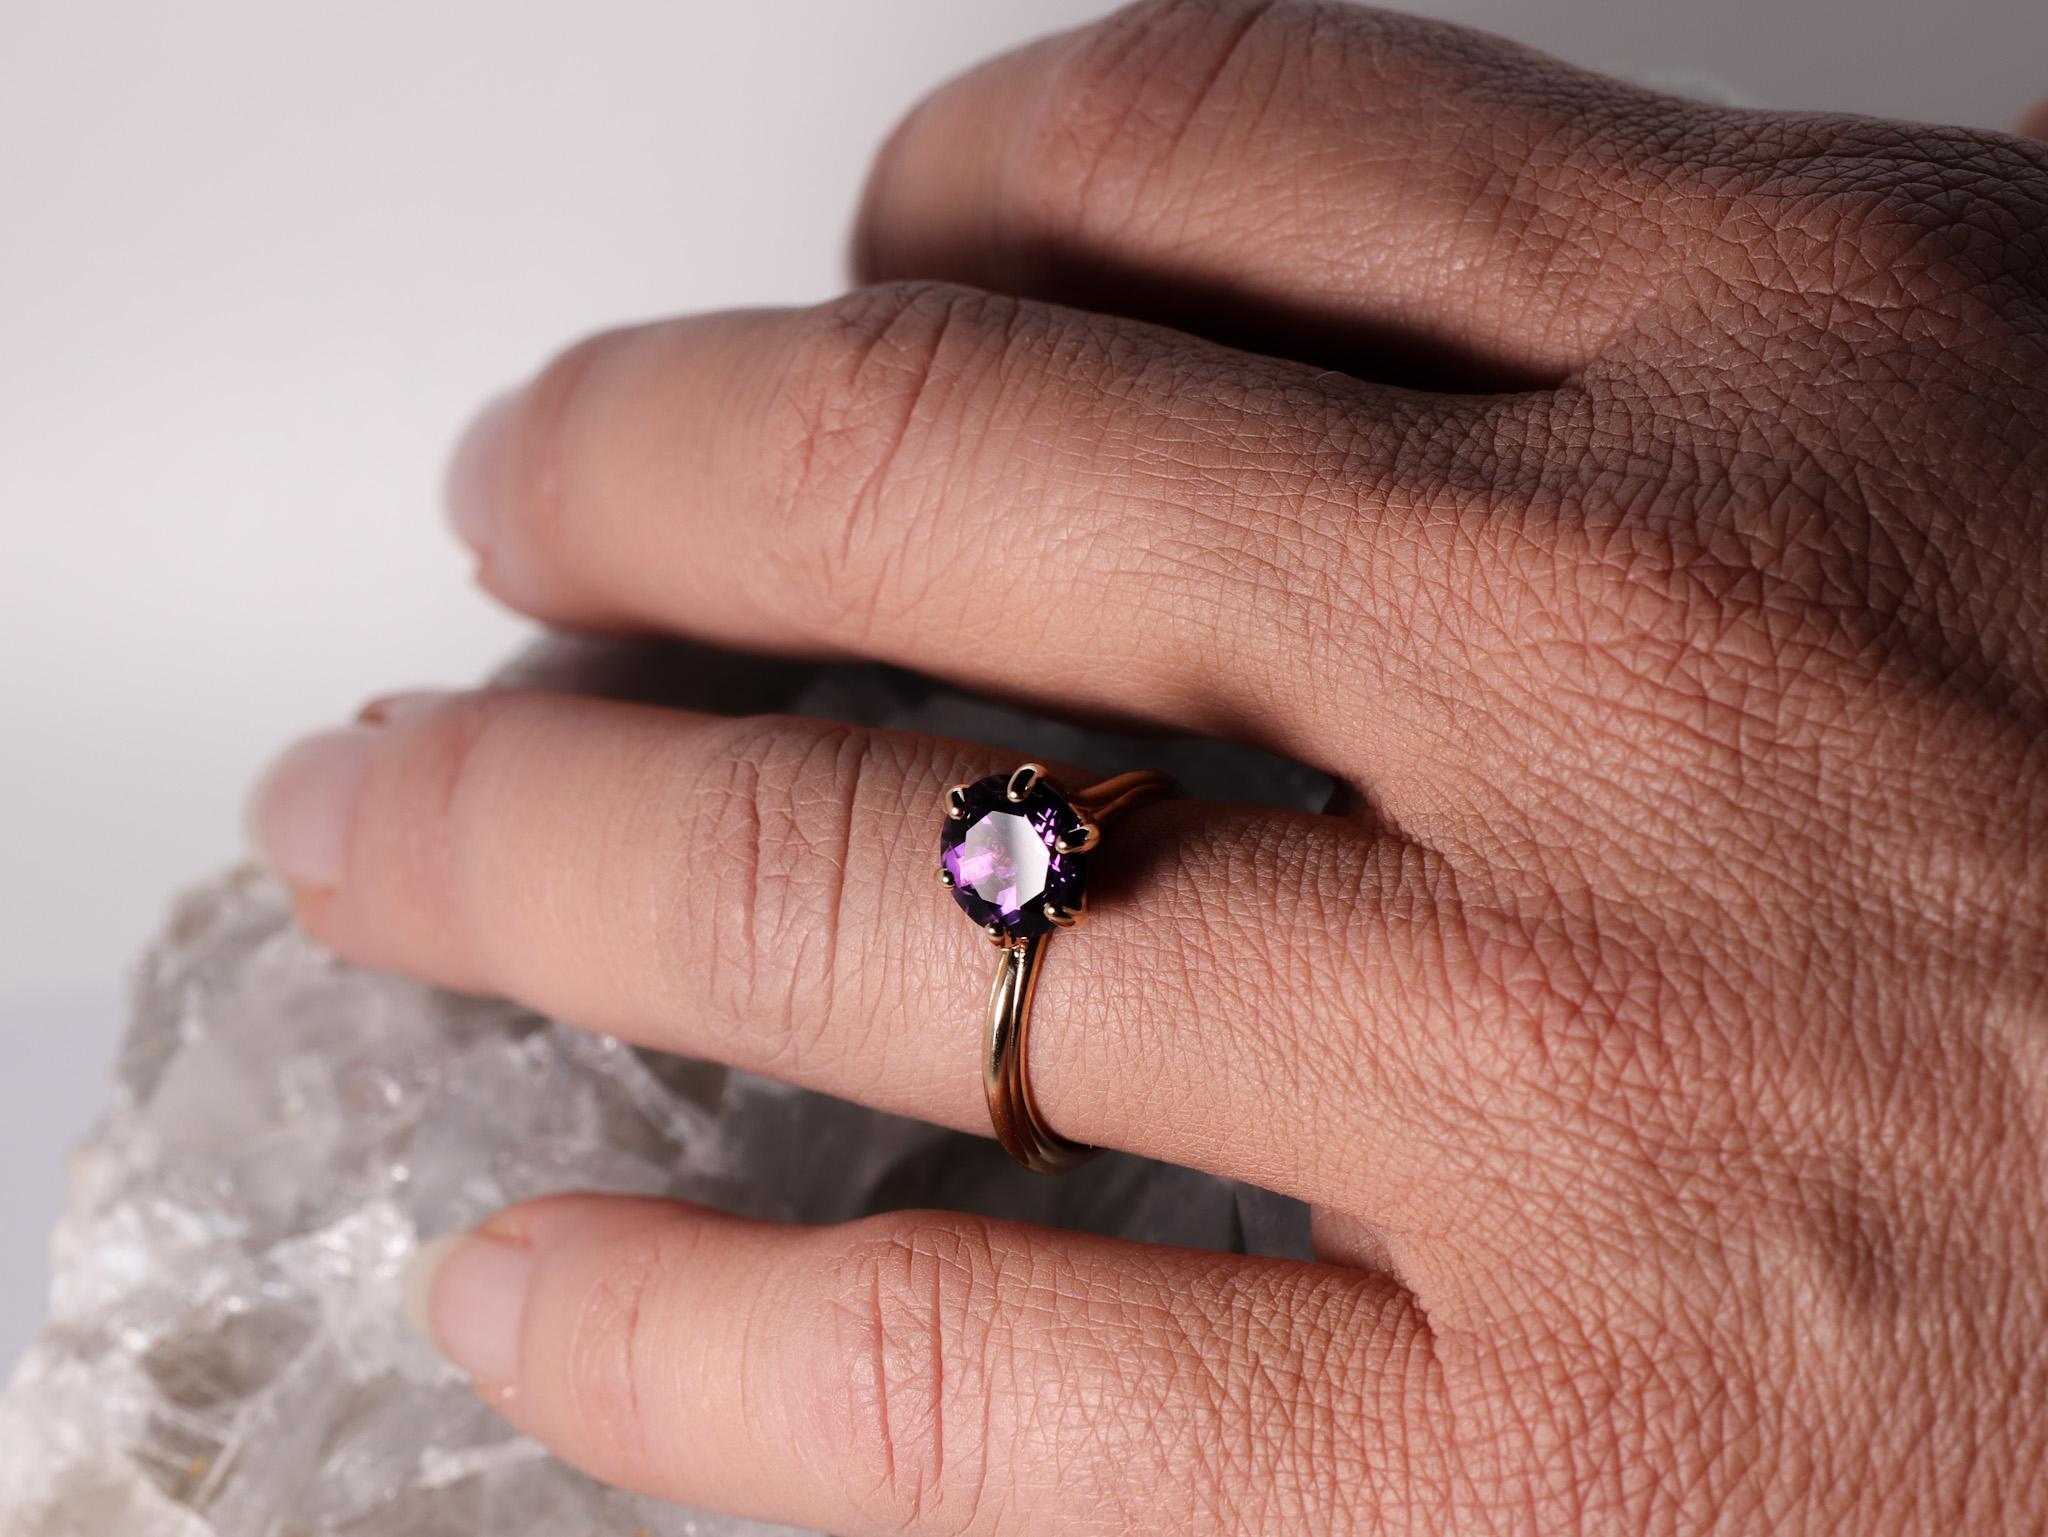 18K Rose Gold Made in Italy Asymmetric Cosmic Design Stackable Amethyst Cocktail Ring.
The Egle ring is made of 18 karat rose gold and features a round mixed cut natural amethyst around 1.68 carats, diameter 7.8 mm. The total weight of the ring is